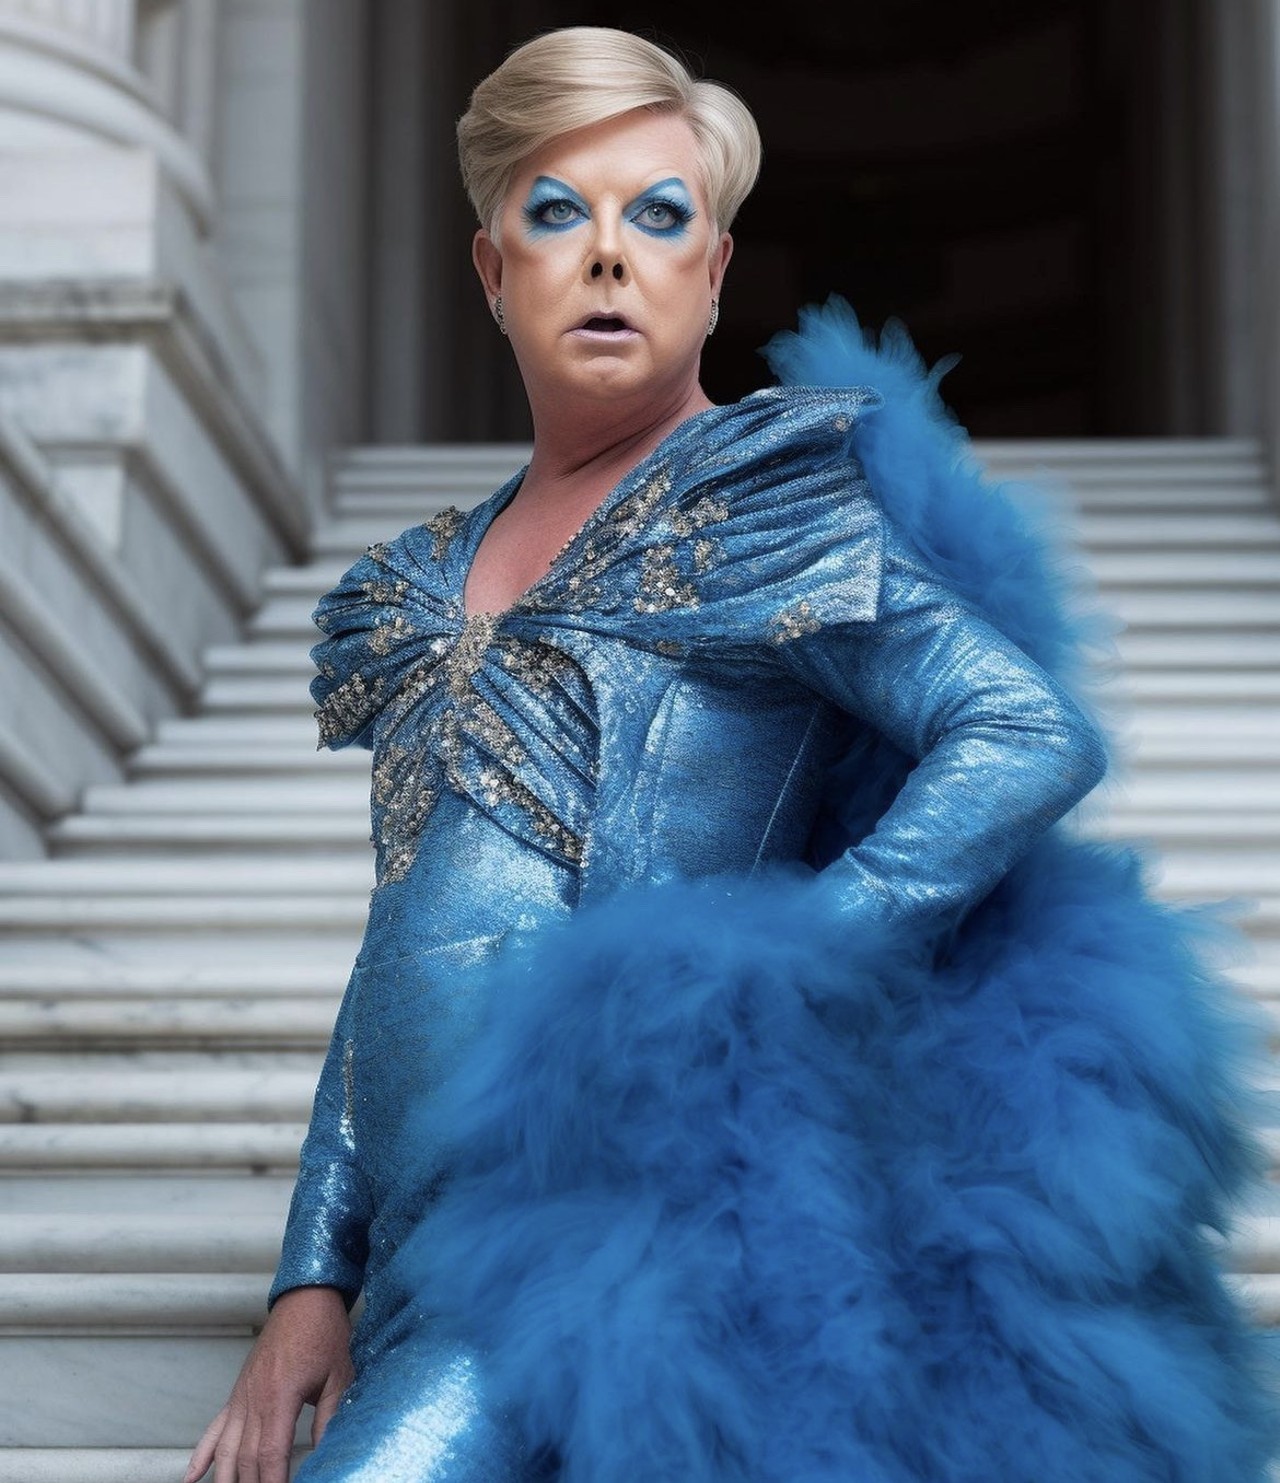  Lindsey Graham 
&#147;Lady Graham Cracker - Riding in on her high horse always asking for money, honey. She&#146;s a powerful queen who loves to control the purse strings AND your lady parts. Don&#146;t she look good in a gown though? #rupublicans #lindseygraham&#148; 